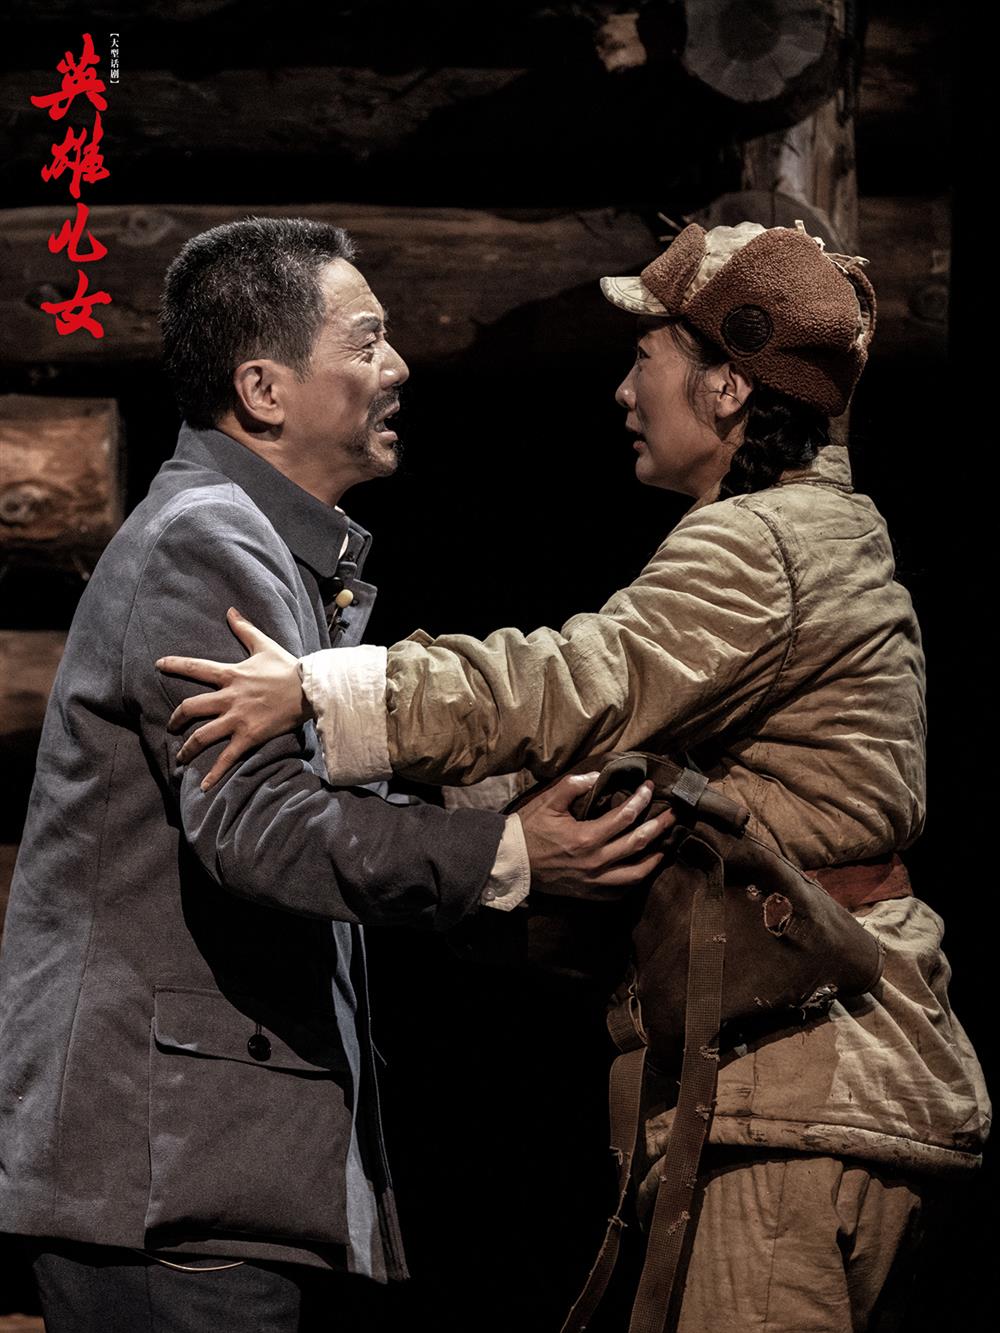 The soldiers shed tears one after another, and in this Korean War drama, the children | Wang Cheng | play